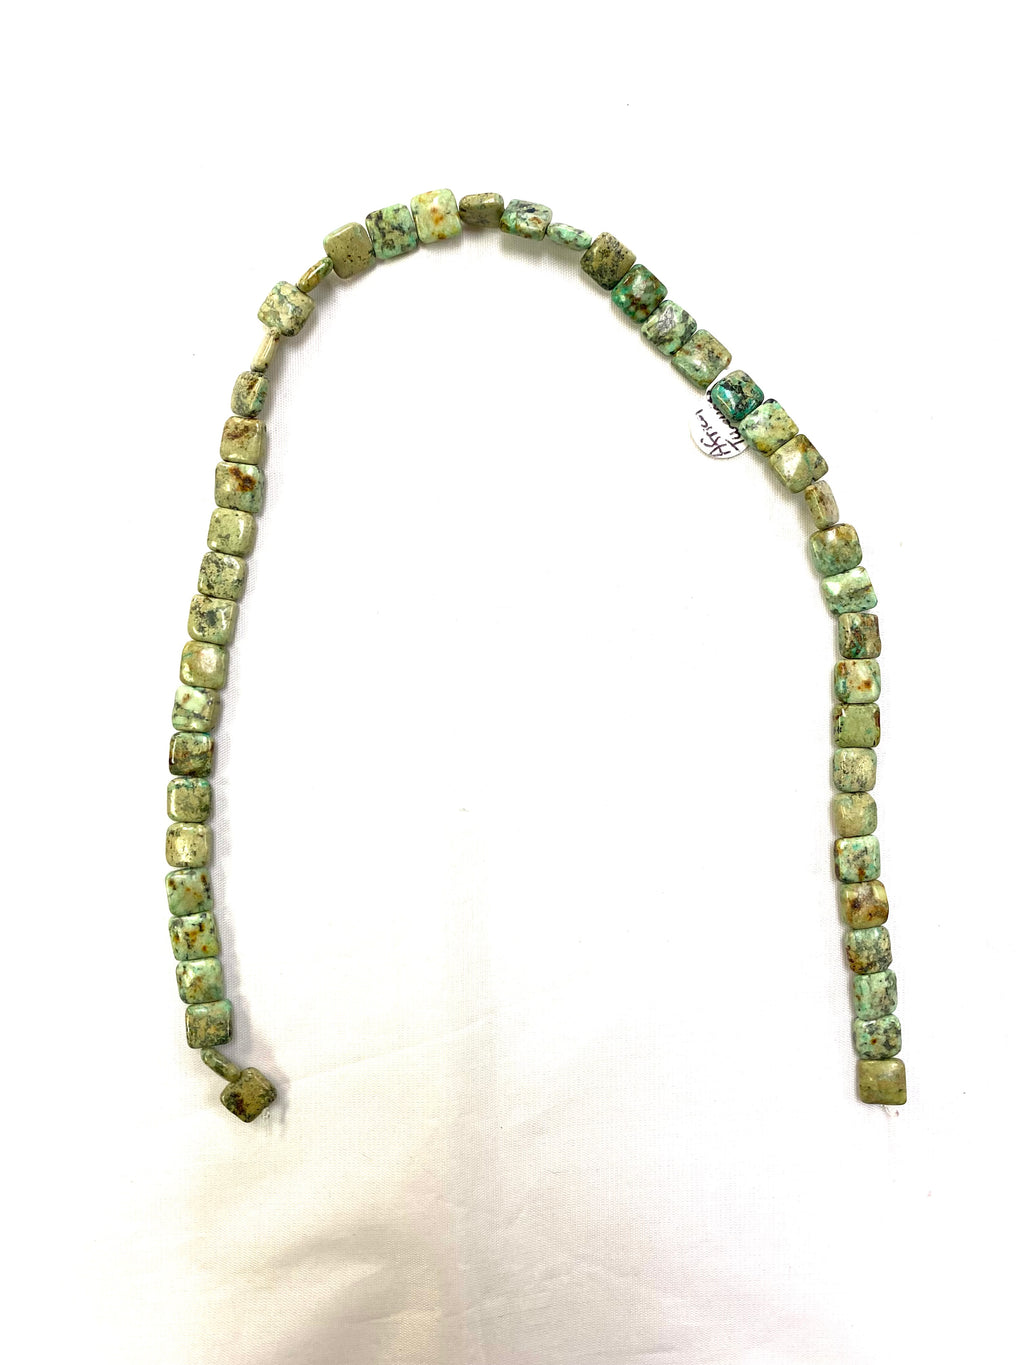 African Turquoise Bead Strand (Flat-Square) - Lighten Up Shop